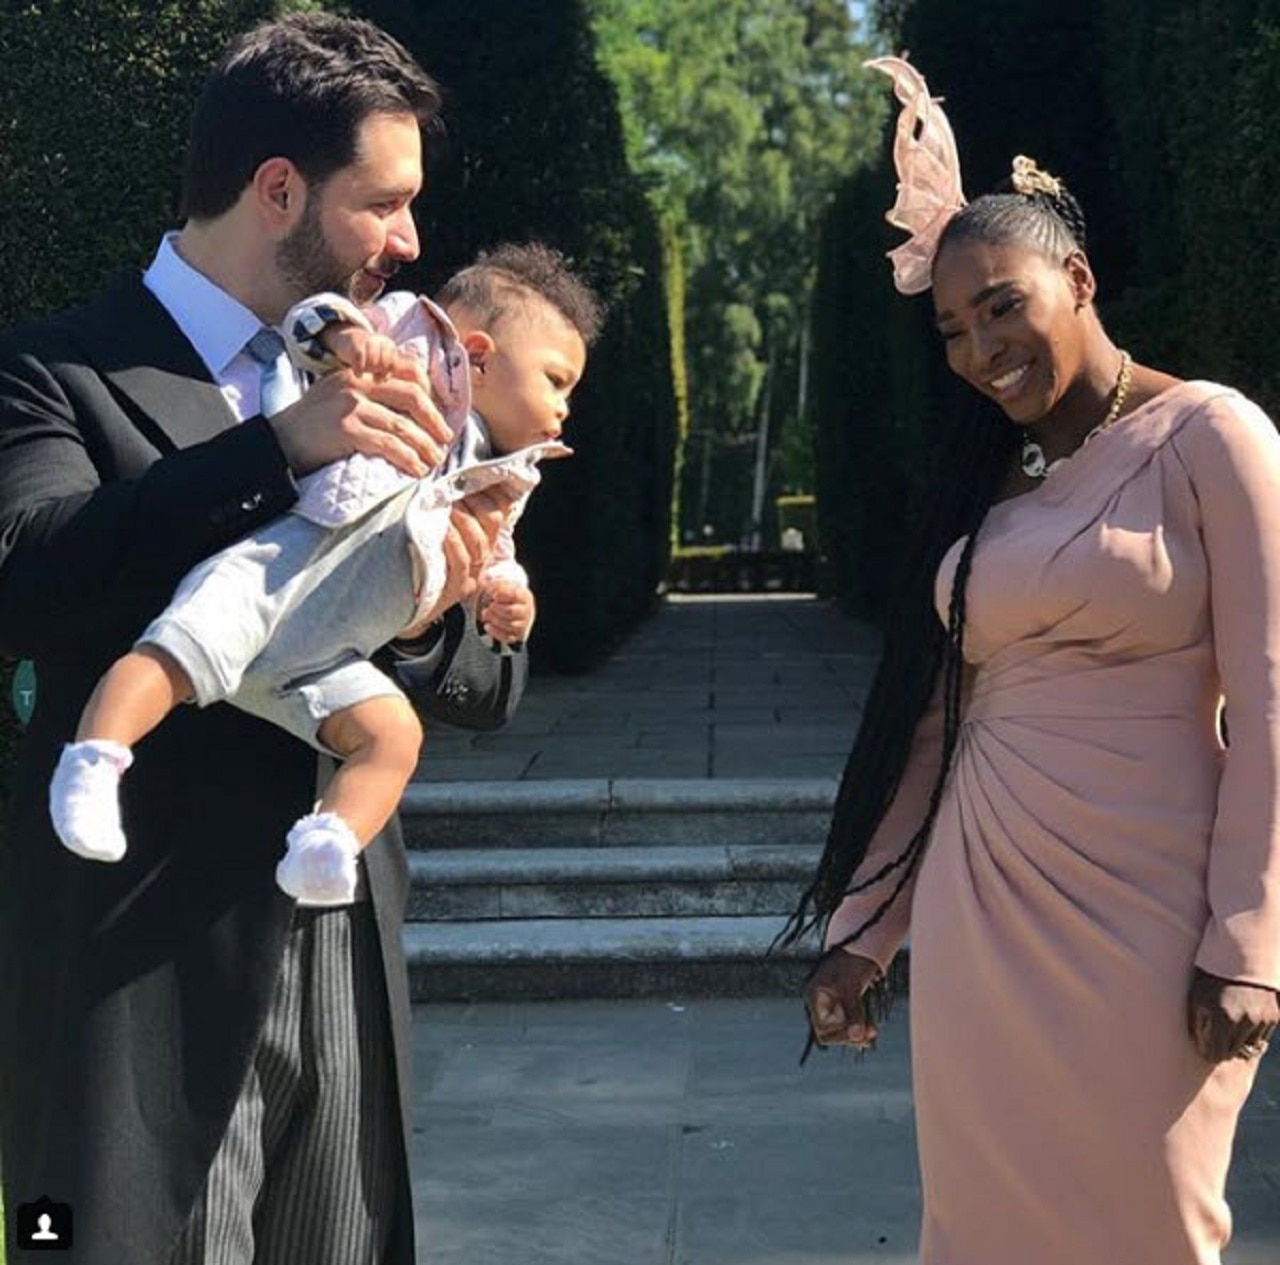 Serena Williams loses No.1 ranking after maternity leave; is it time for change? | SBS ...1280 x 1265